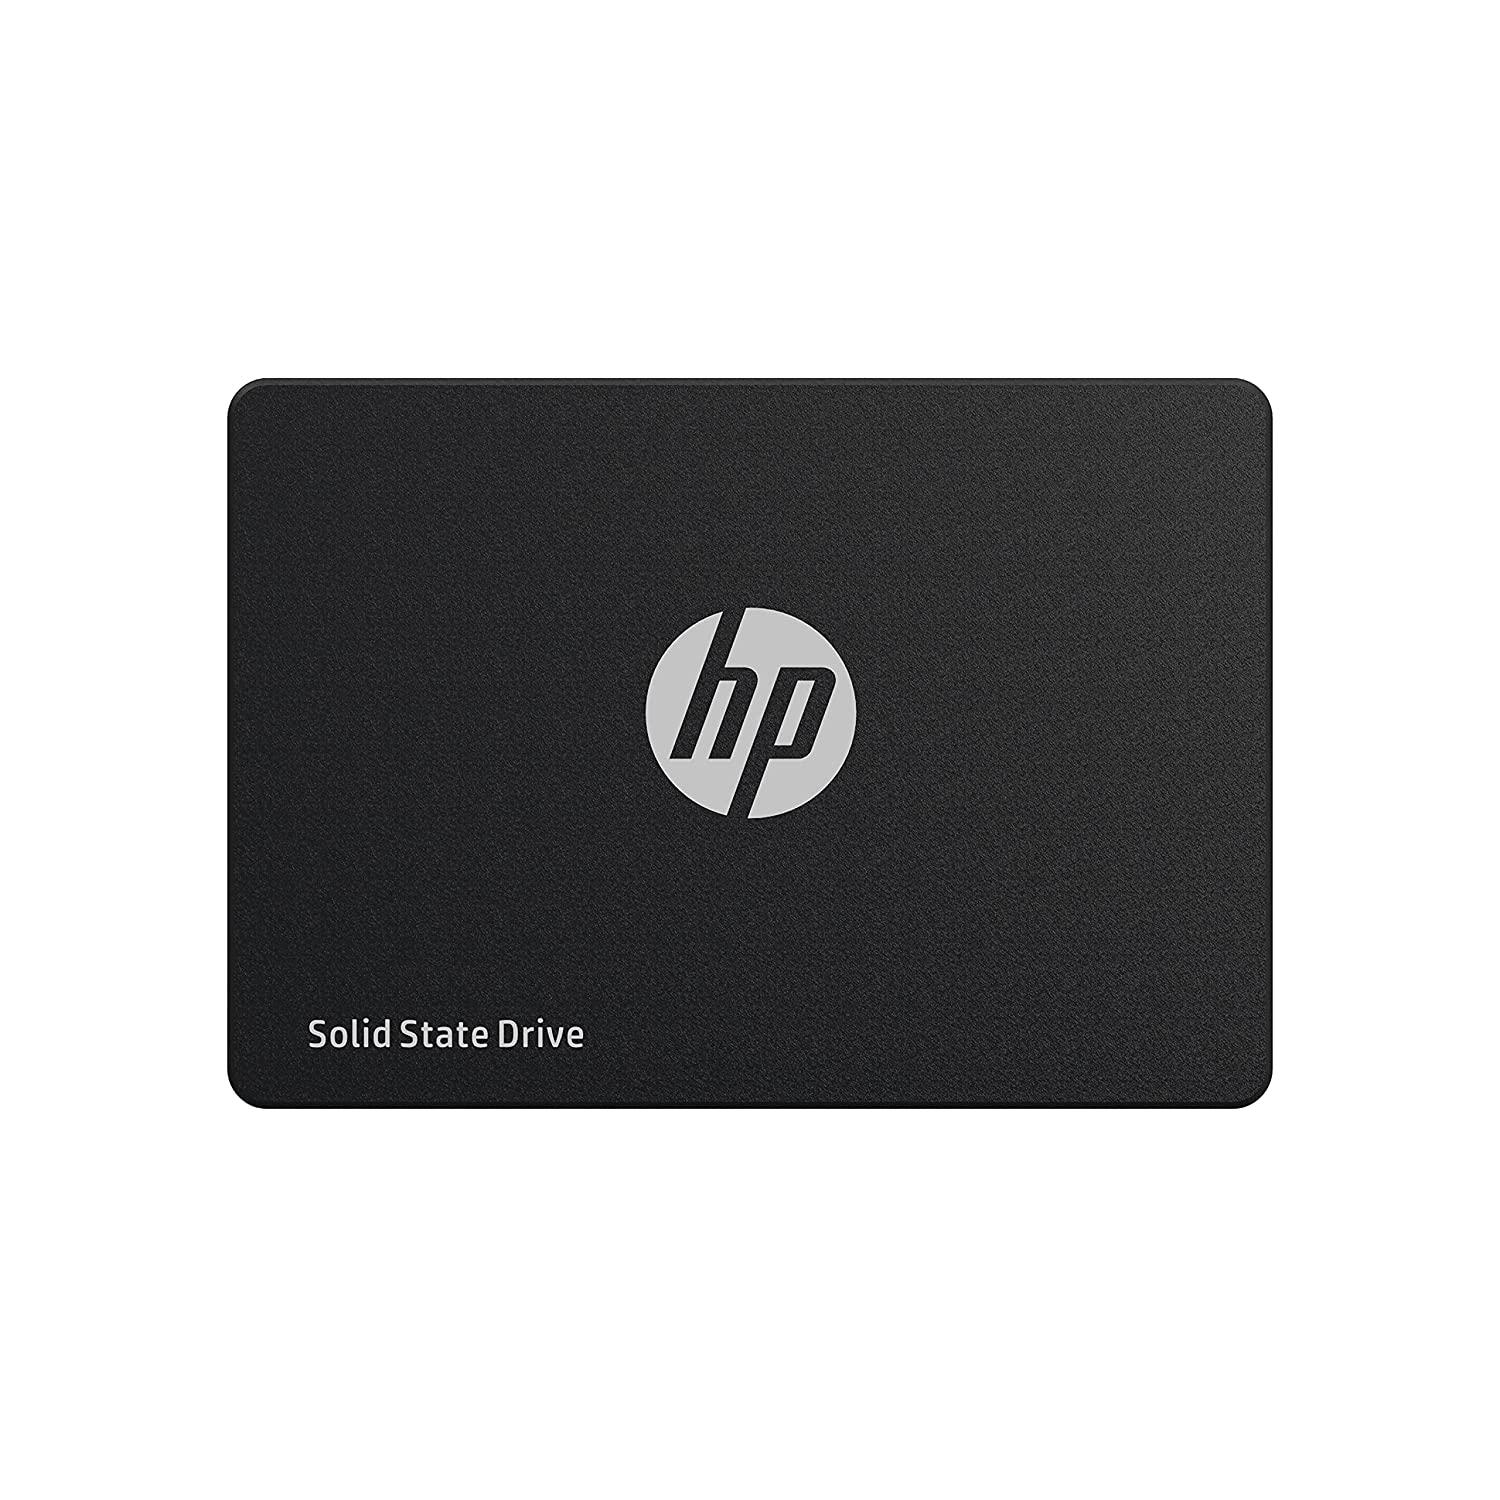 Selected image for HP 345M9AA S650 SSD, 480 GB, SATA 3, 2.5"